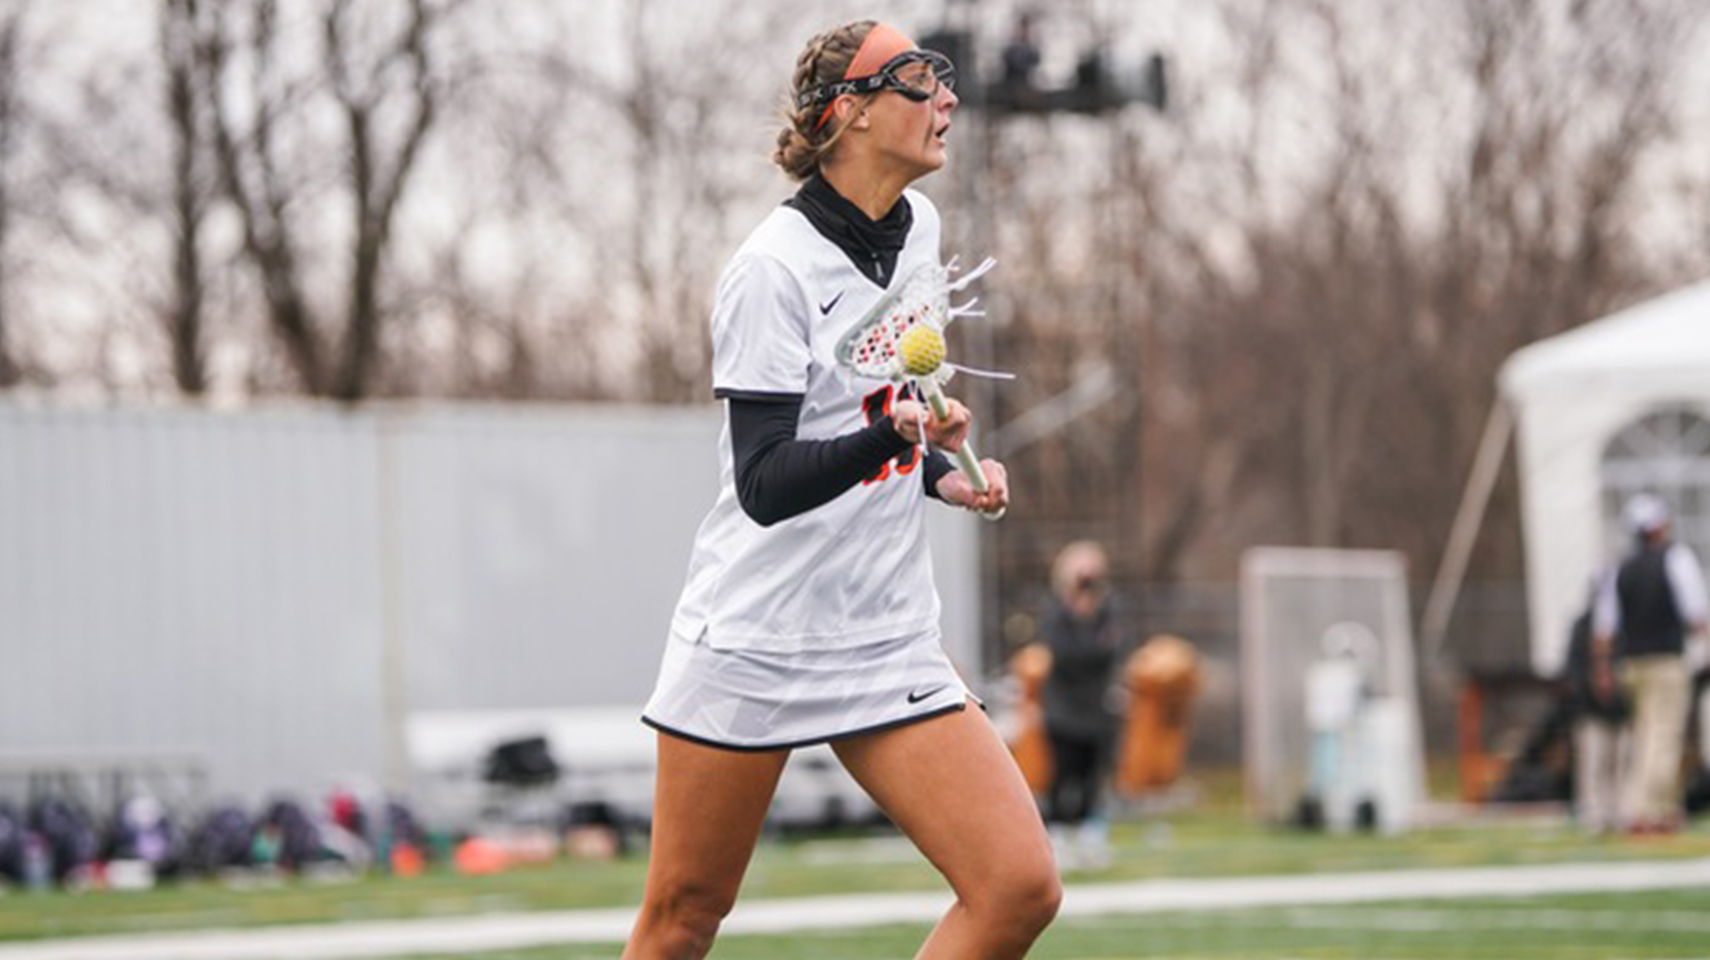 Women's lacrosse player holding the ball